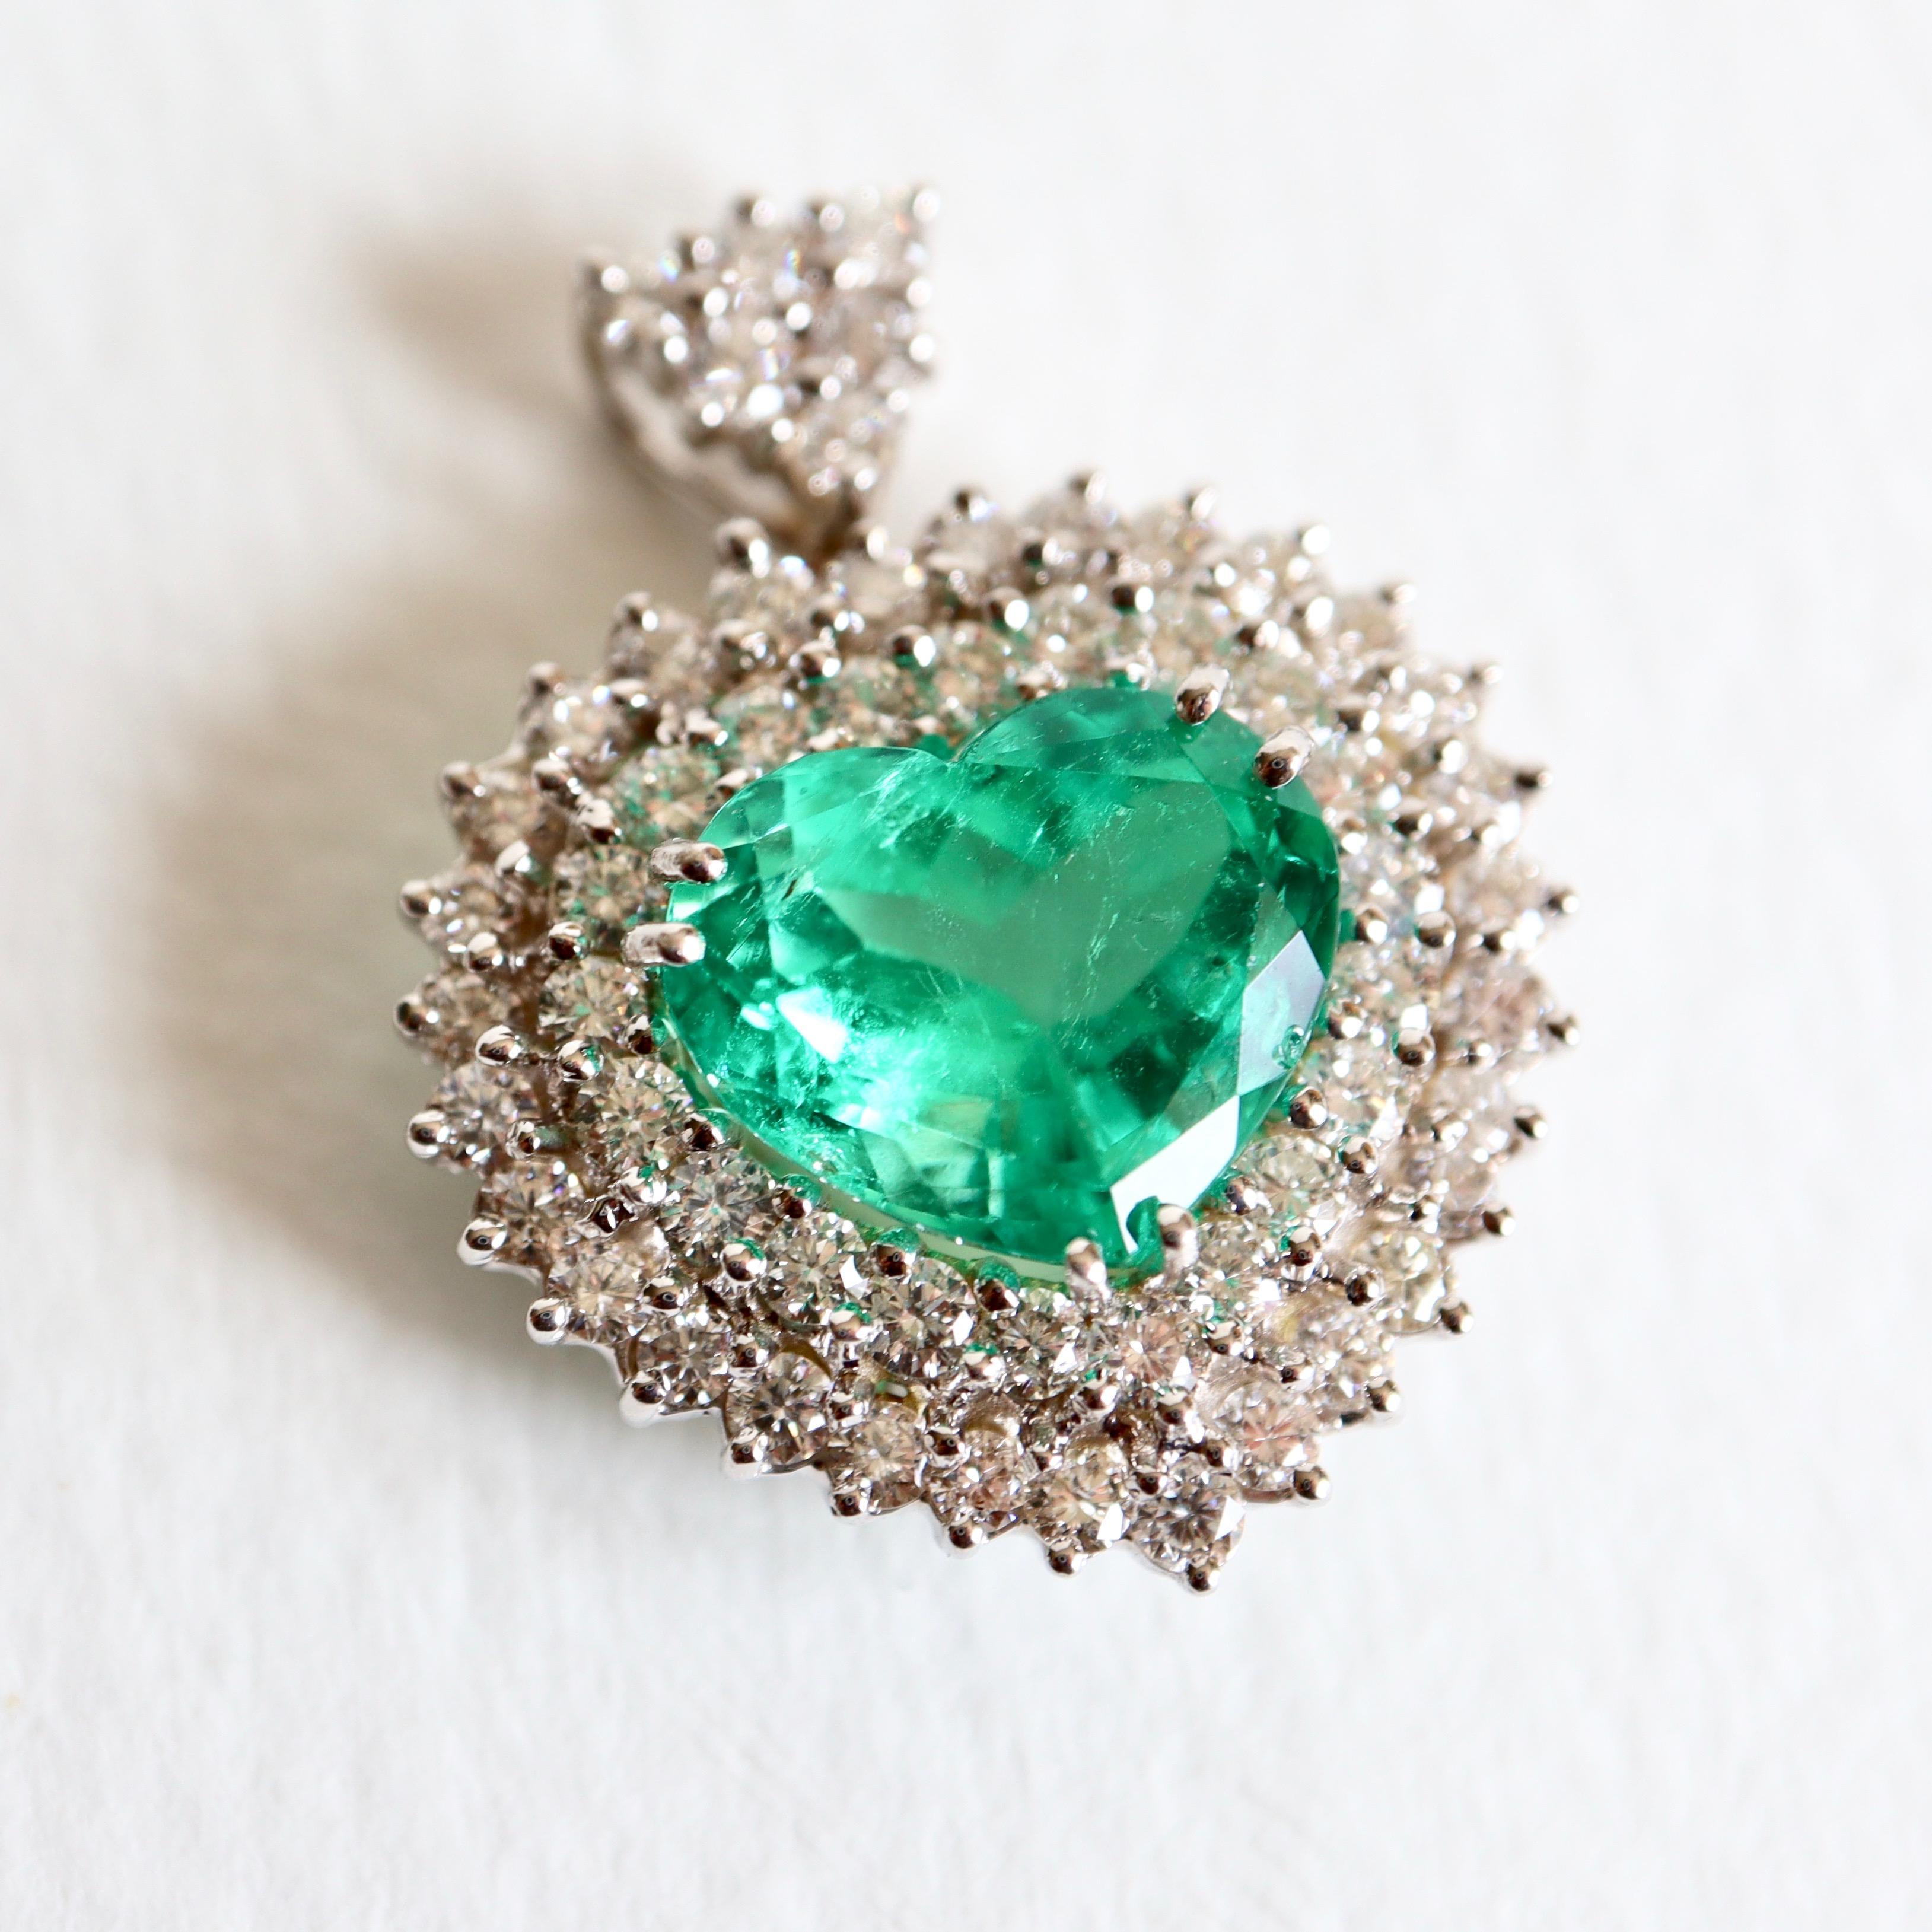 Pendant setting two Rows of Diamonds retained by an articulated Bail set with Diamonds for 1.46 Carats of Diamonds in Total. This Pendant holds in its Center an important Heart Cut Emerald weighing 4.63 Carats. Certificate n ° 24 Colombia resin and